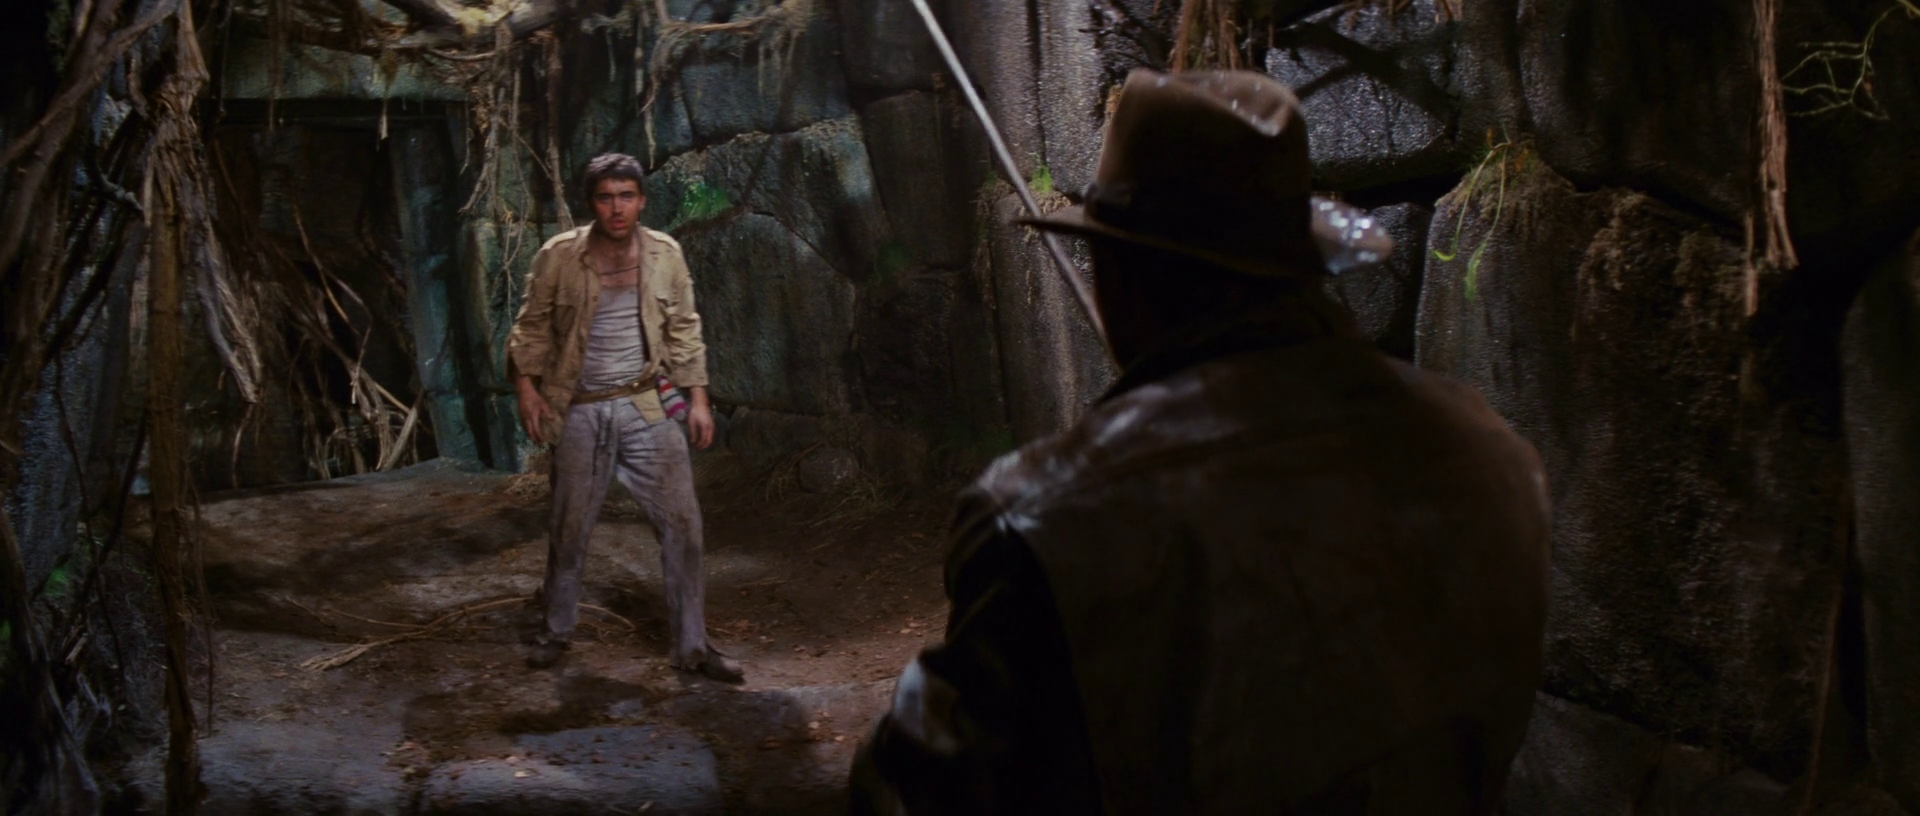 ᱦ Indiana.Jones.and.the.Raiders.of.the.Lost.Ark.1981.1080p.BluRay.X264-AMIABL-2.png